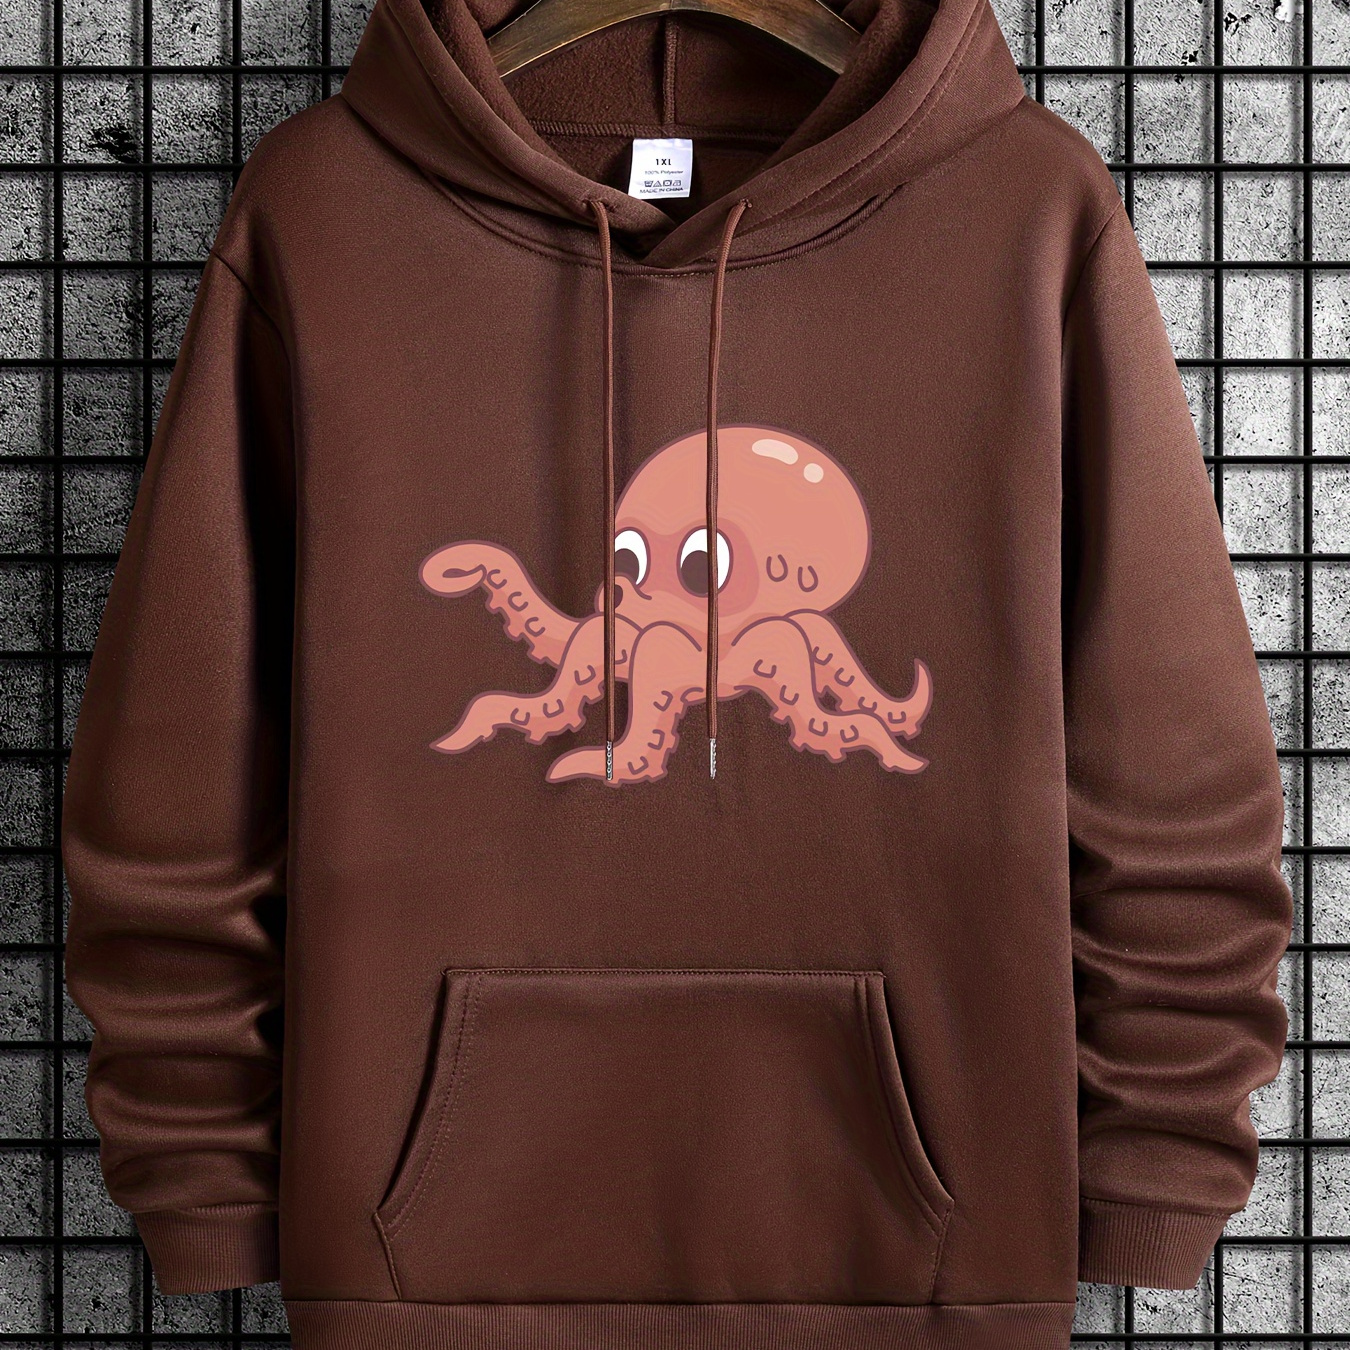 

Plus Size Men's Hooded Sweatshirt, Anime Octopus Graphic Print Hoodies For Spring Fall Winter, Men's Clothing